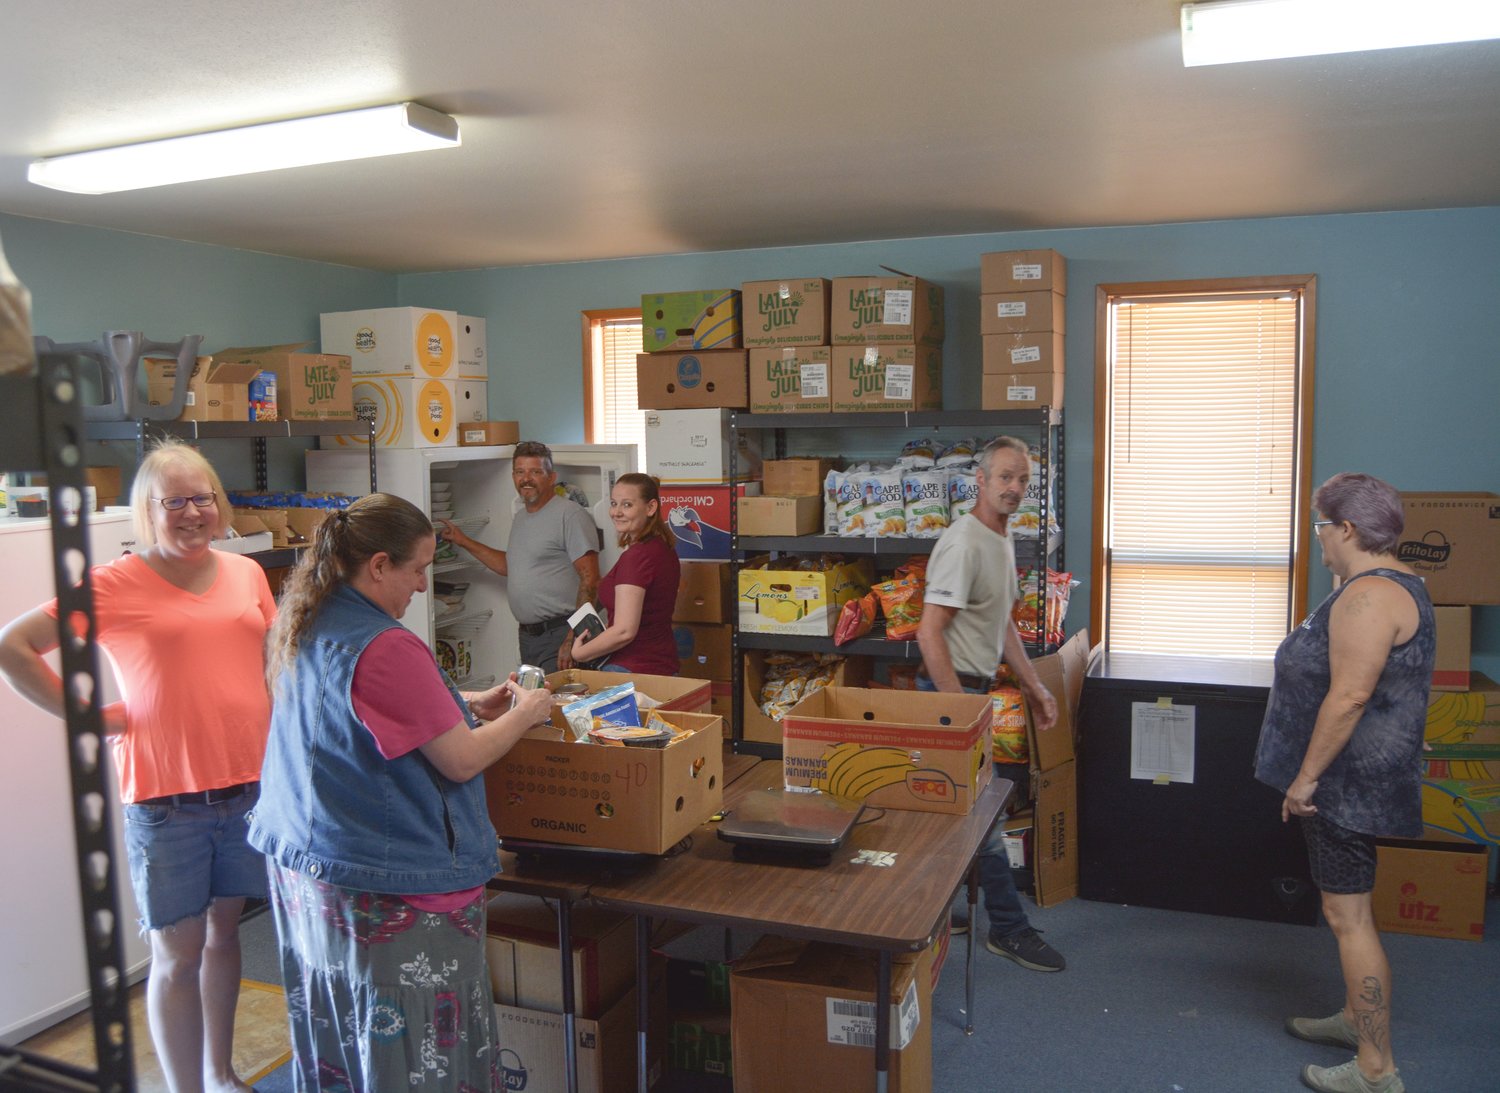 Volunteers with the First Baptist Church of Yelm help serve shoppers their groceries from the food pantry.